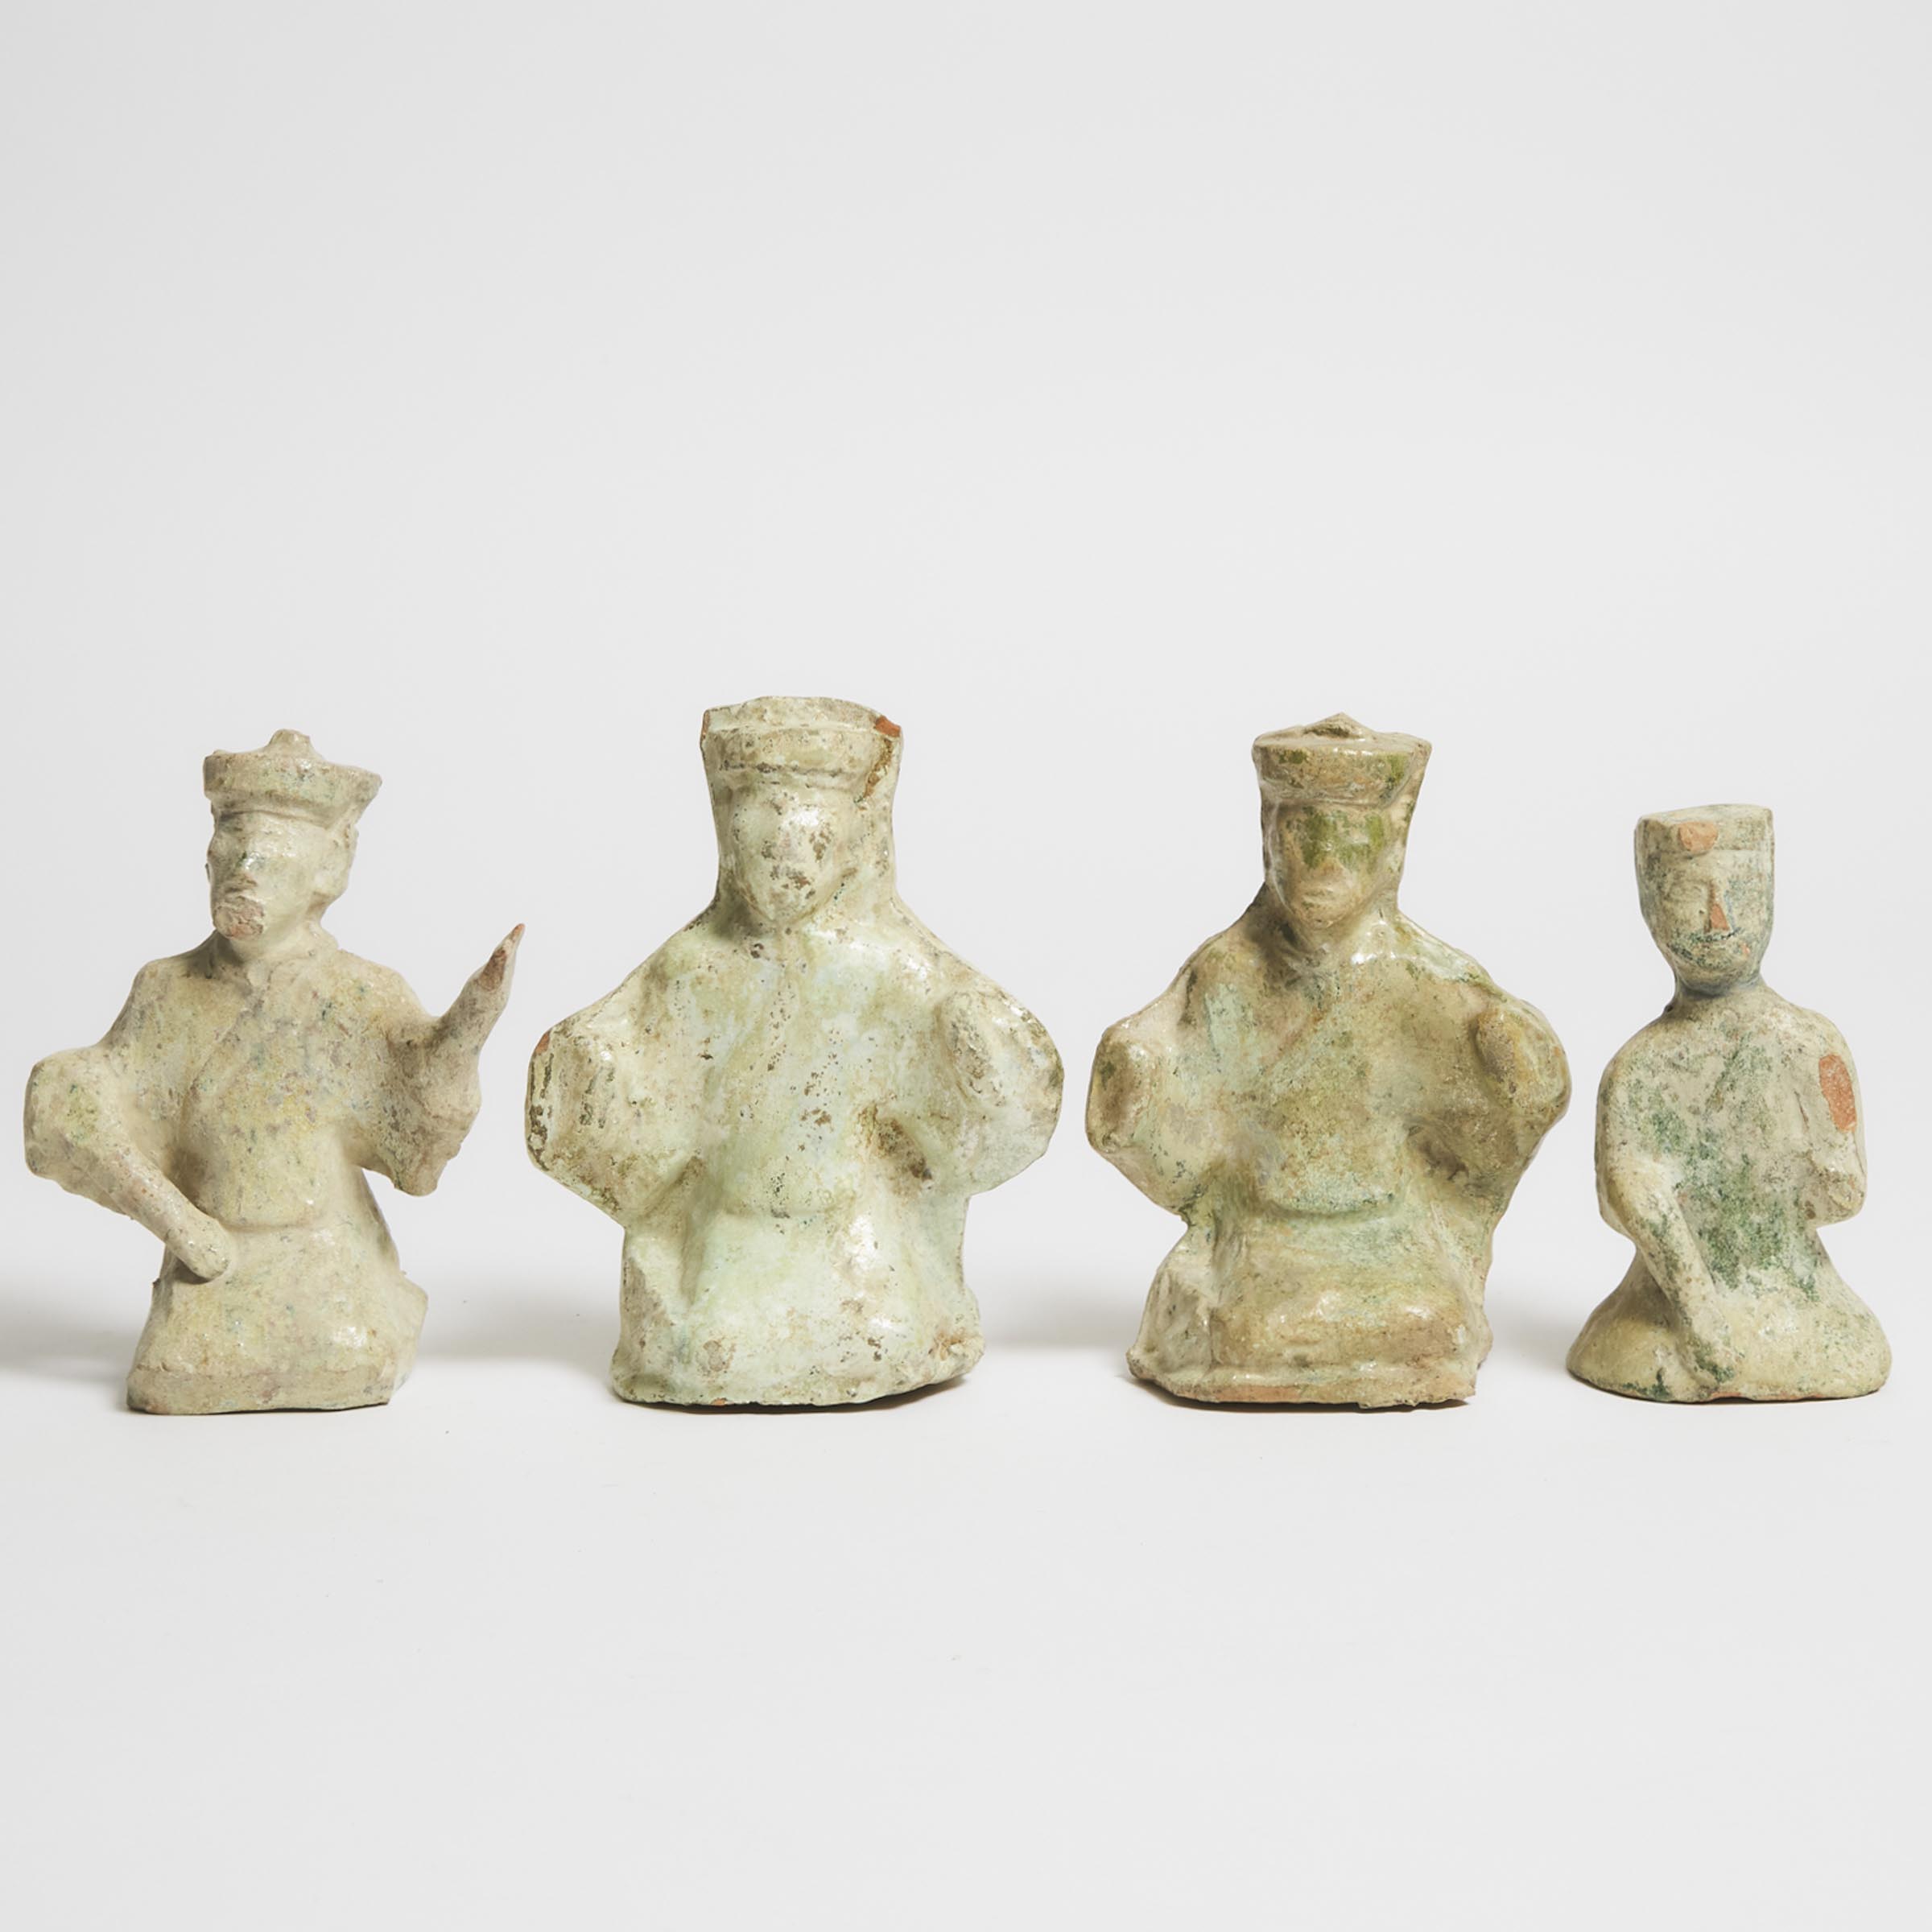 A Group of Four Green-Glazed Pottery Seated Figures, Han Dynasty (206 BC-AD 220)